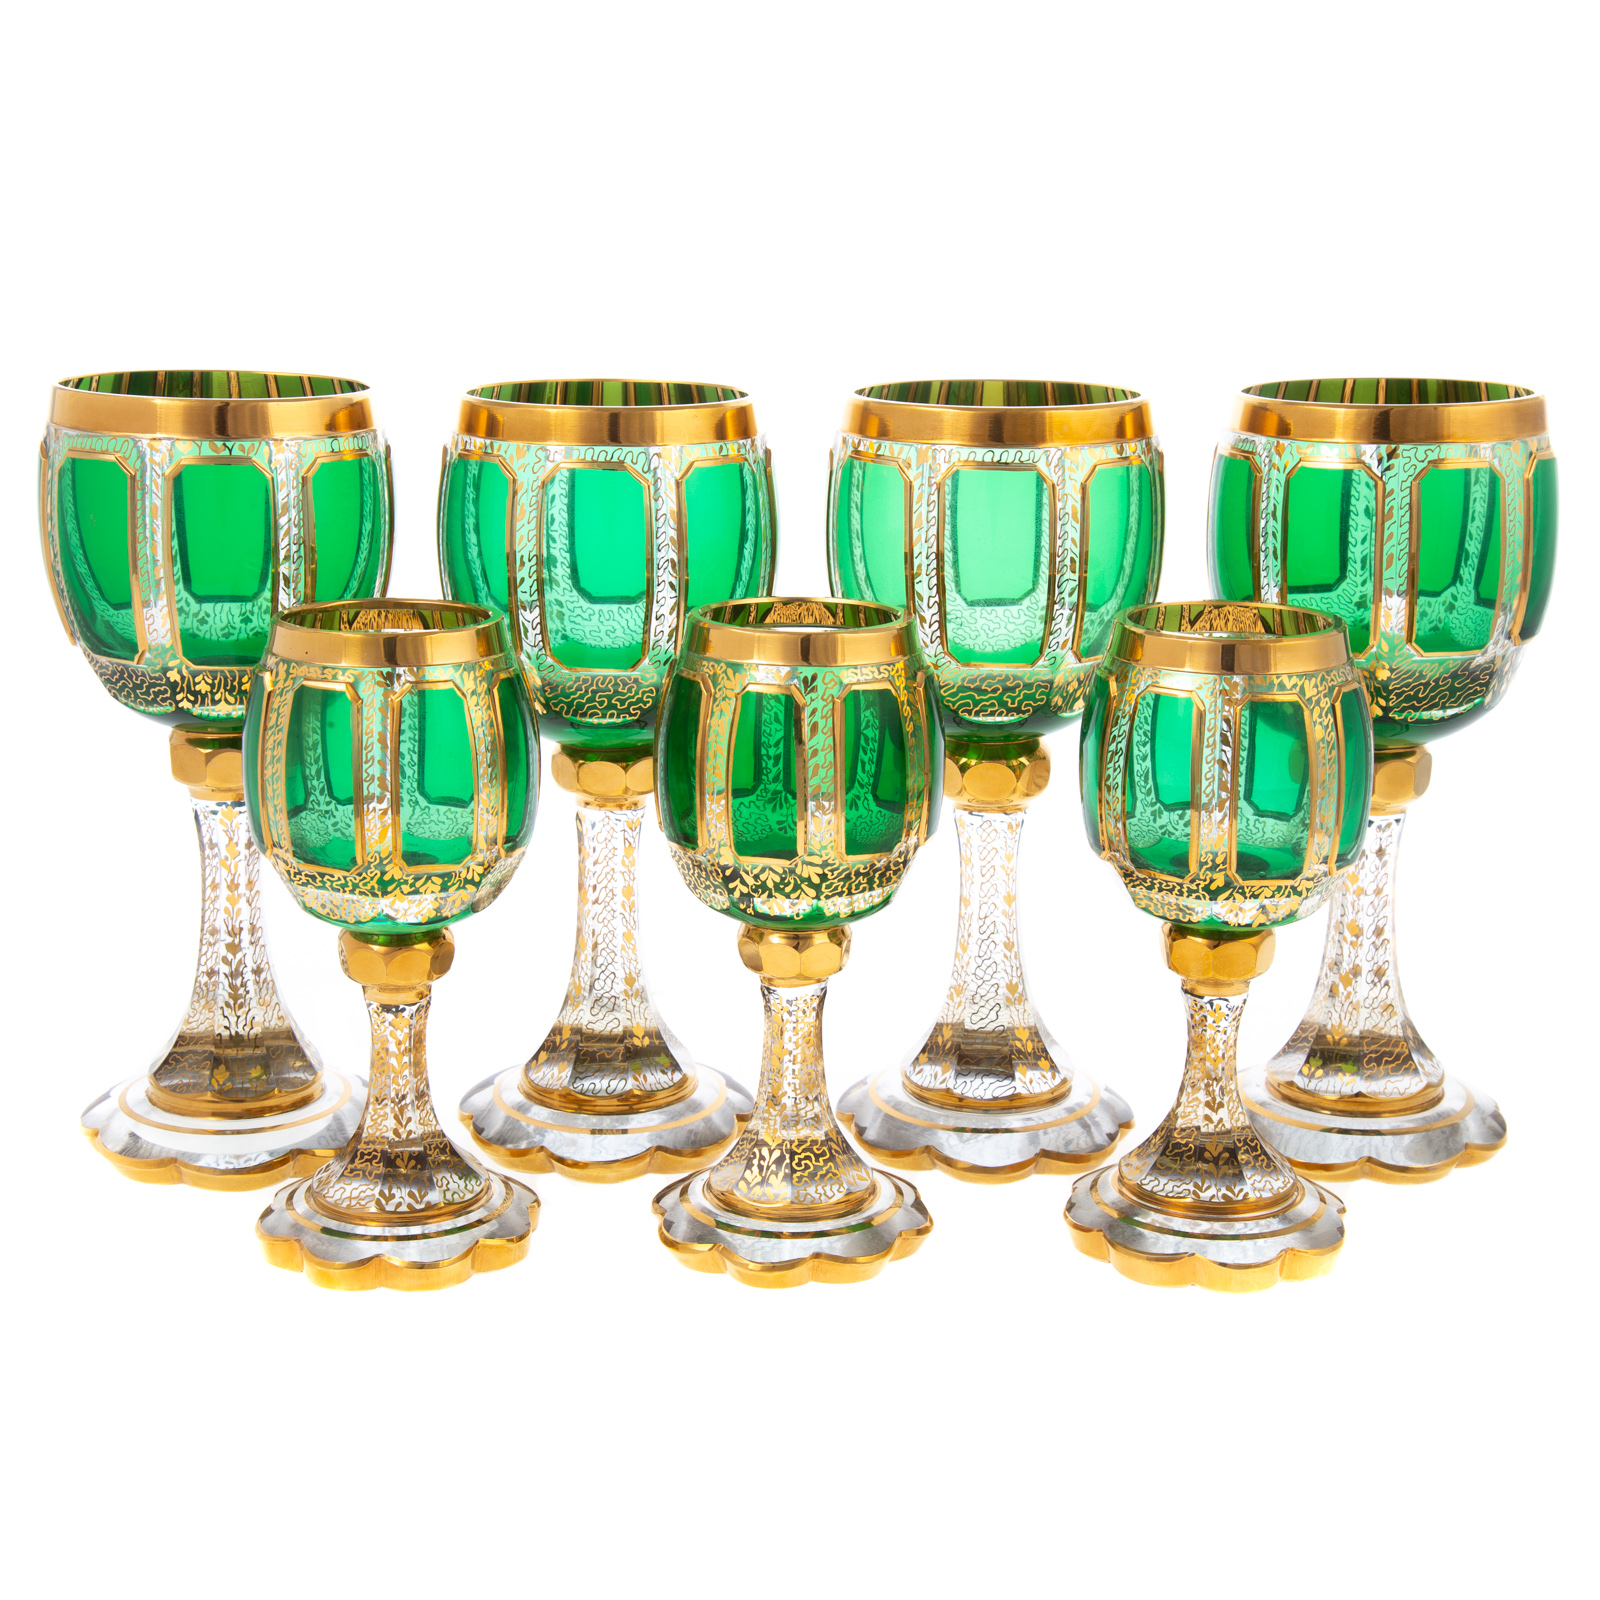 19 CONTINENTAL GLASS WINE GOBLETS 3698be